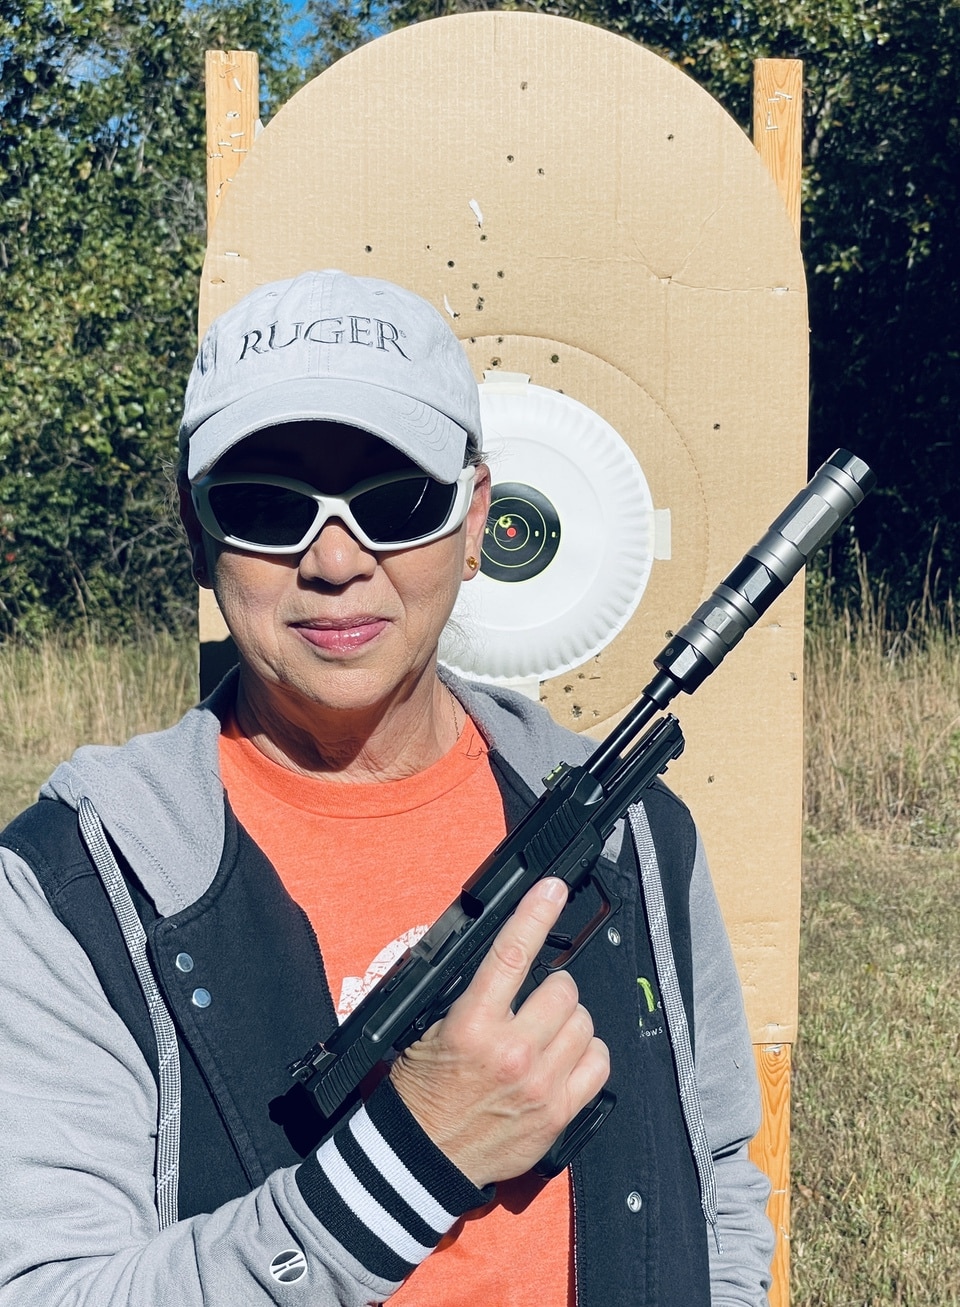 Babbs on range with Ruger 57